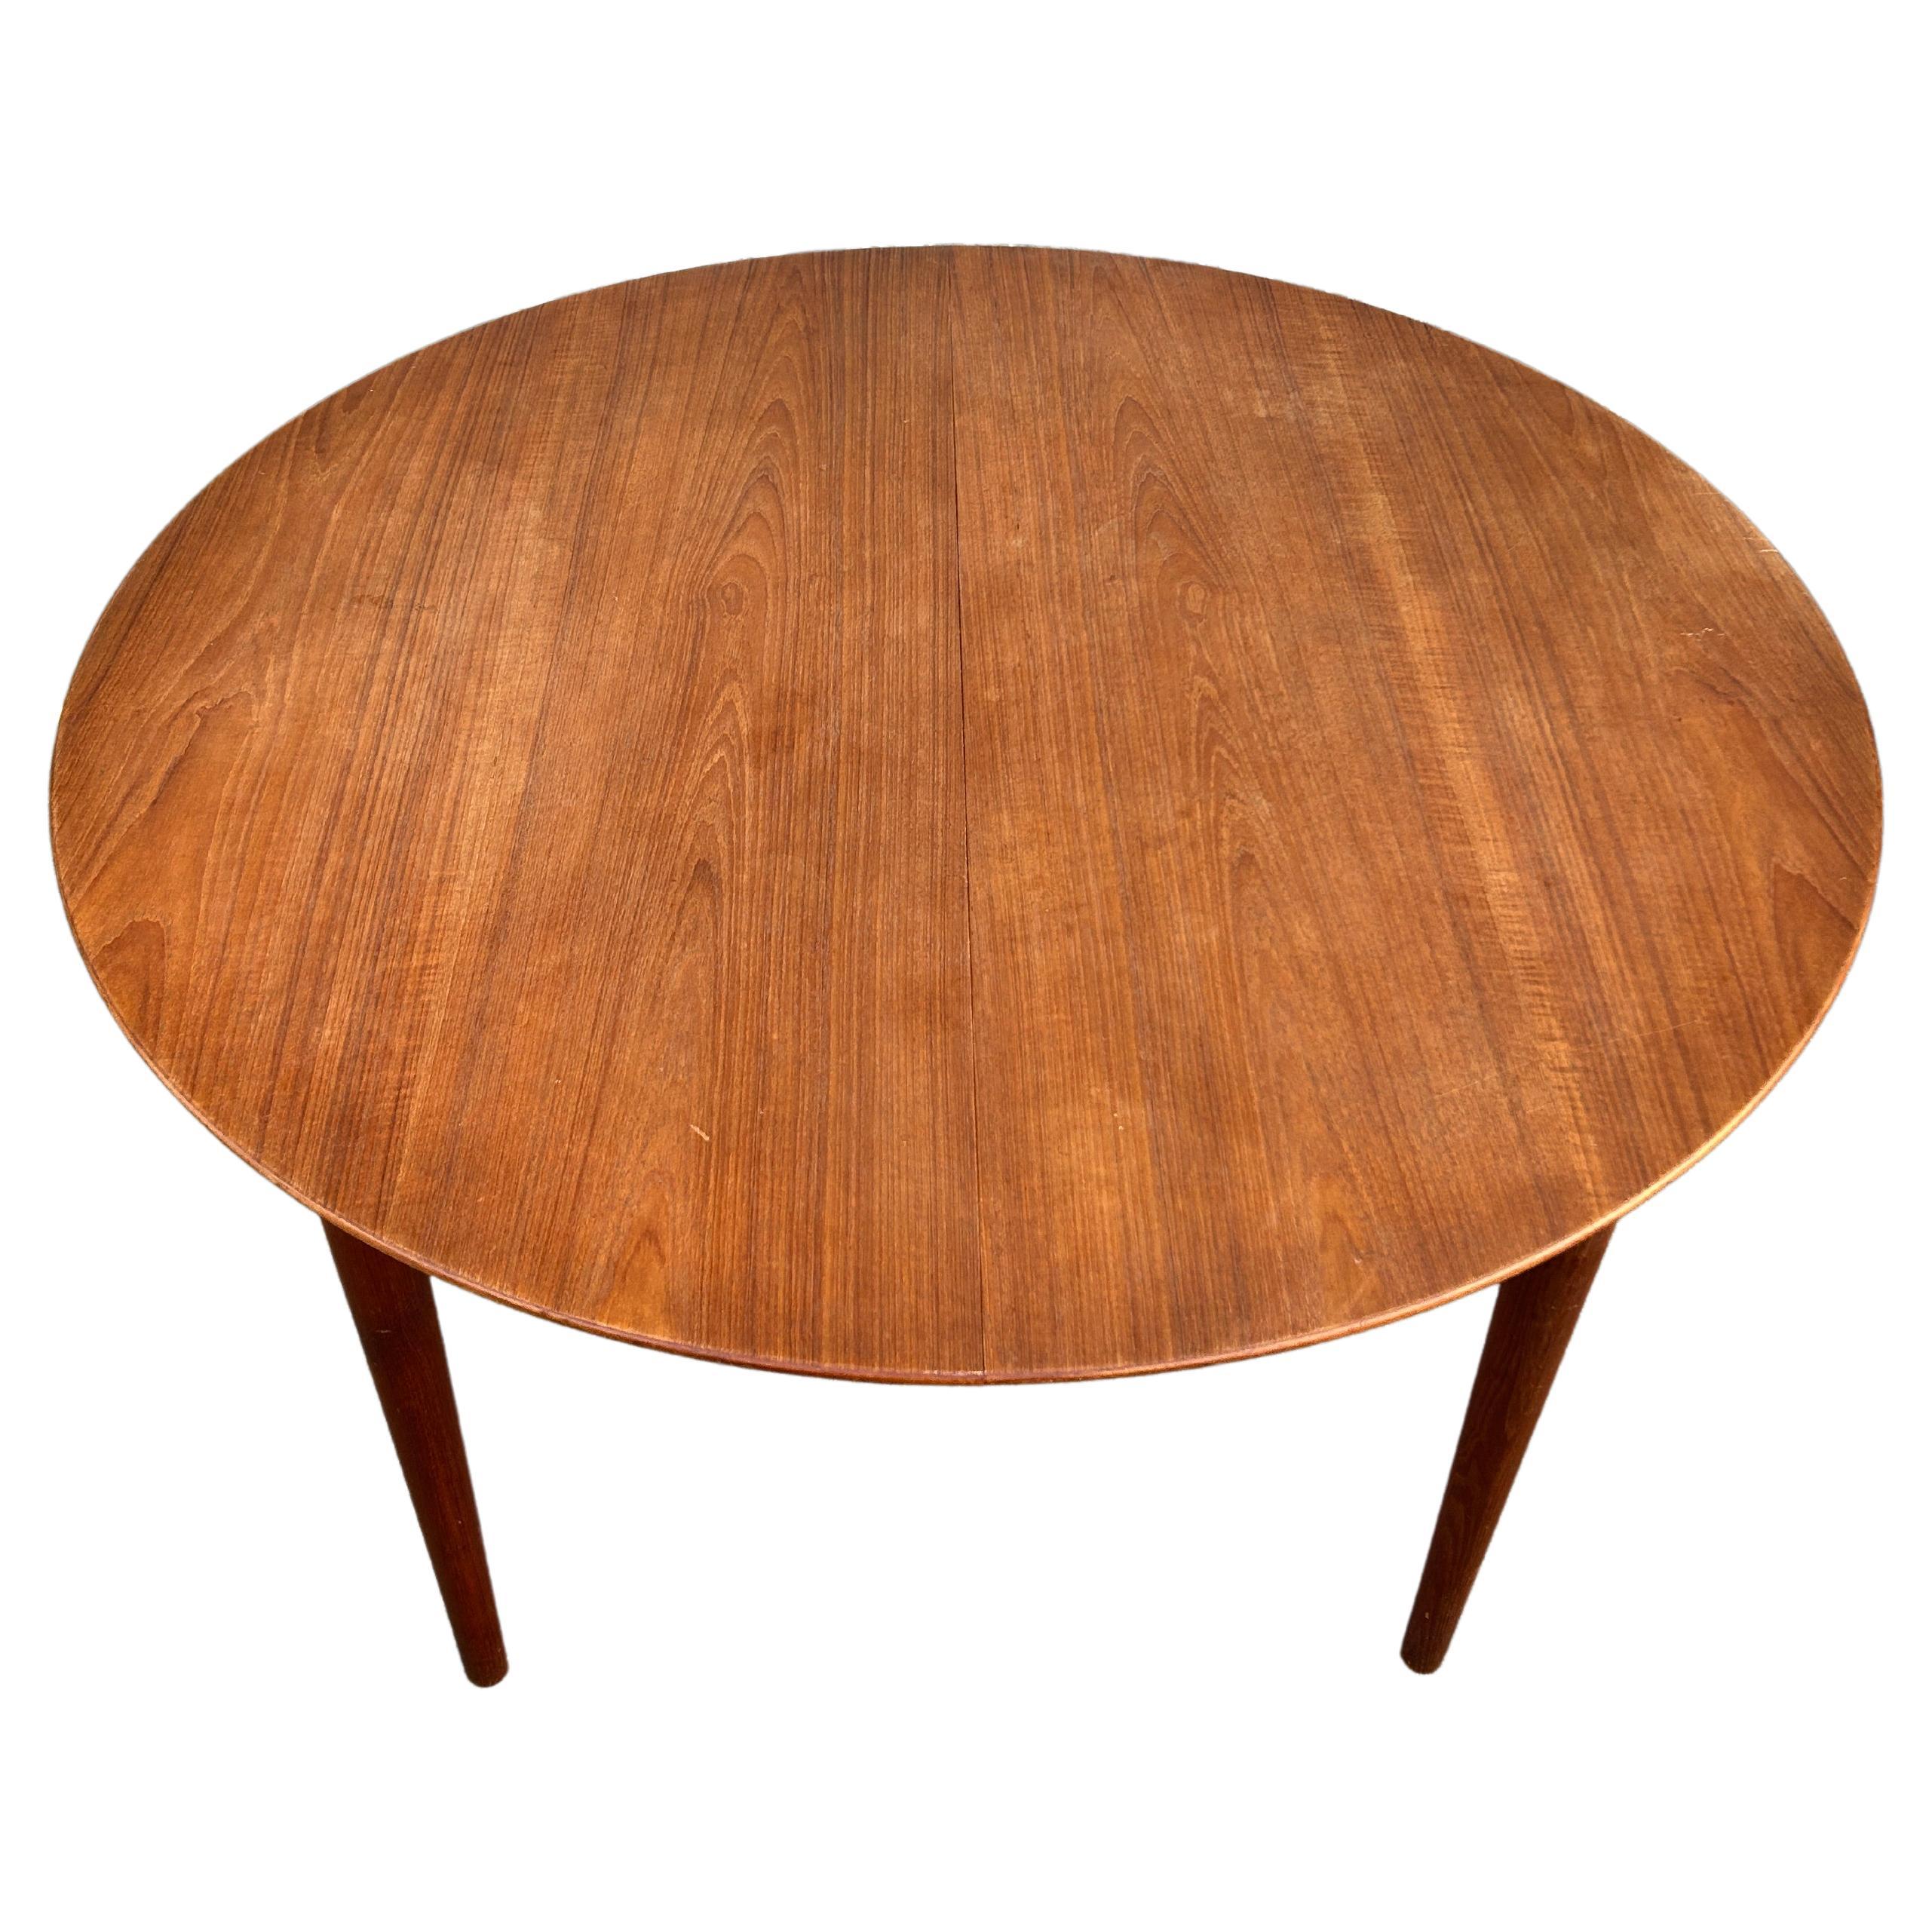 Mid century teak round Danish Modern extension dining table with (2) leaves. This table has Solid teak legs that unscrew with bolts. This table is in good vintage condition shows signs of use, both leaves match the table 100% and have aprons.